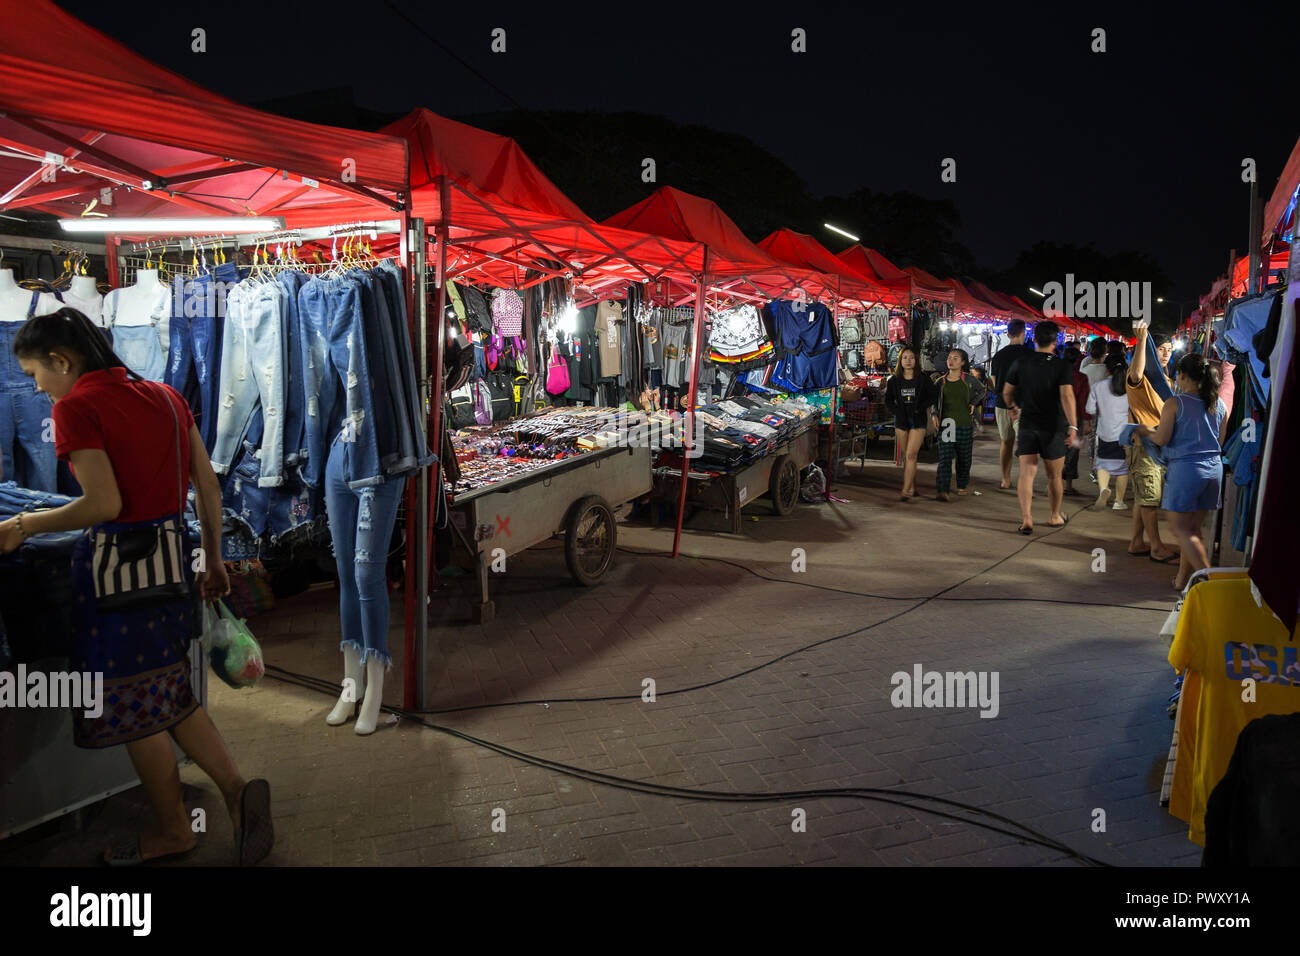 Many stalls full of clothes and other merchandise, local people and tourists at famous and popular Riverside Night Market in Vientiane, Laos, at night Stock Photo